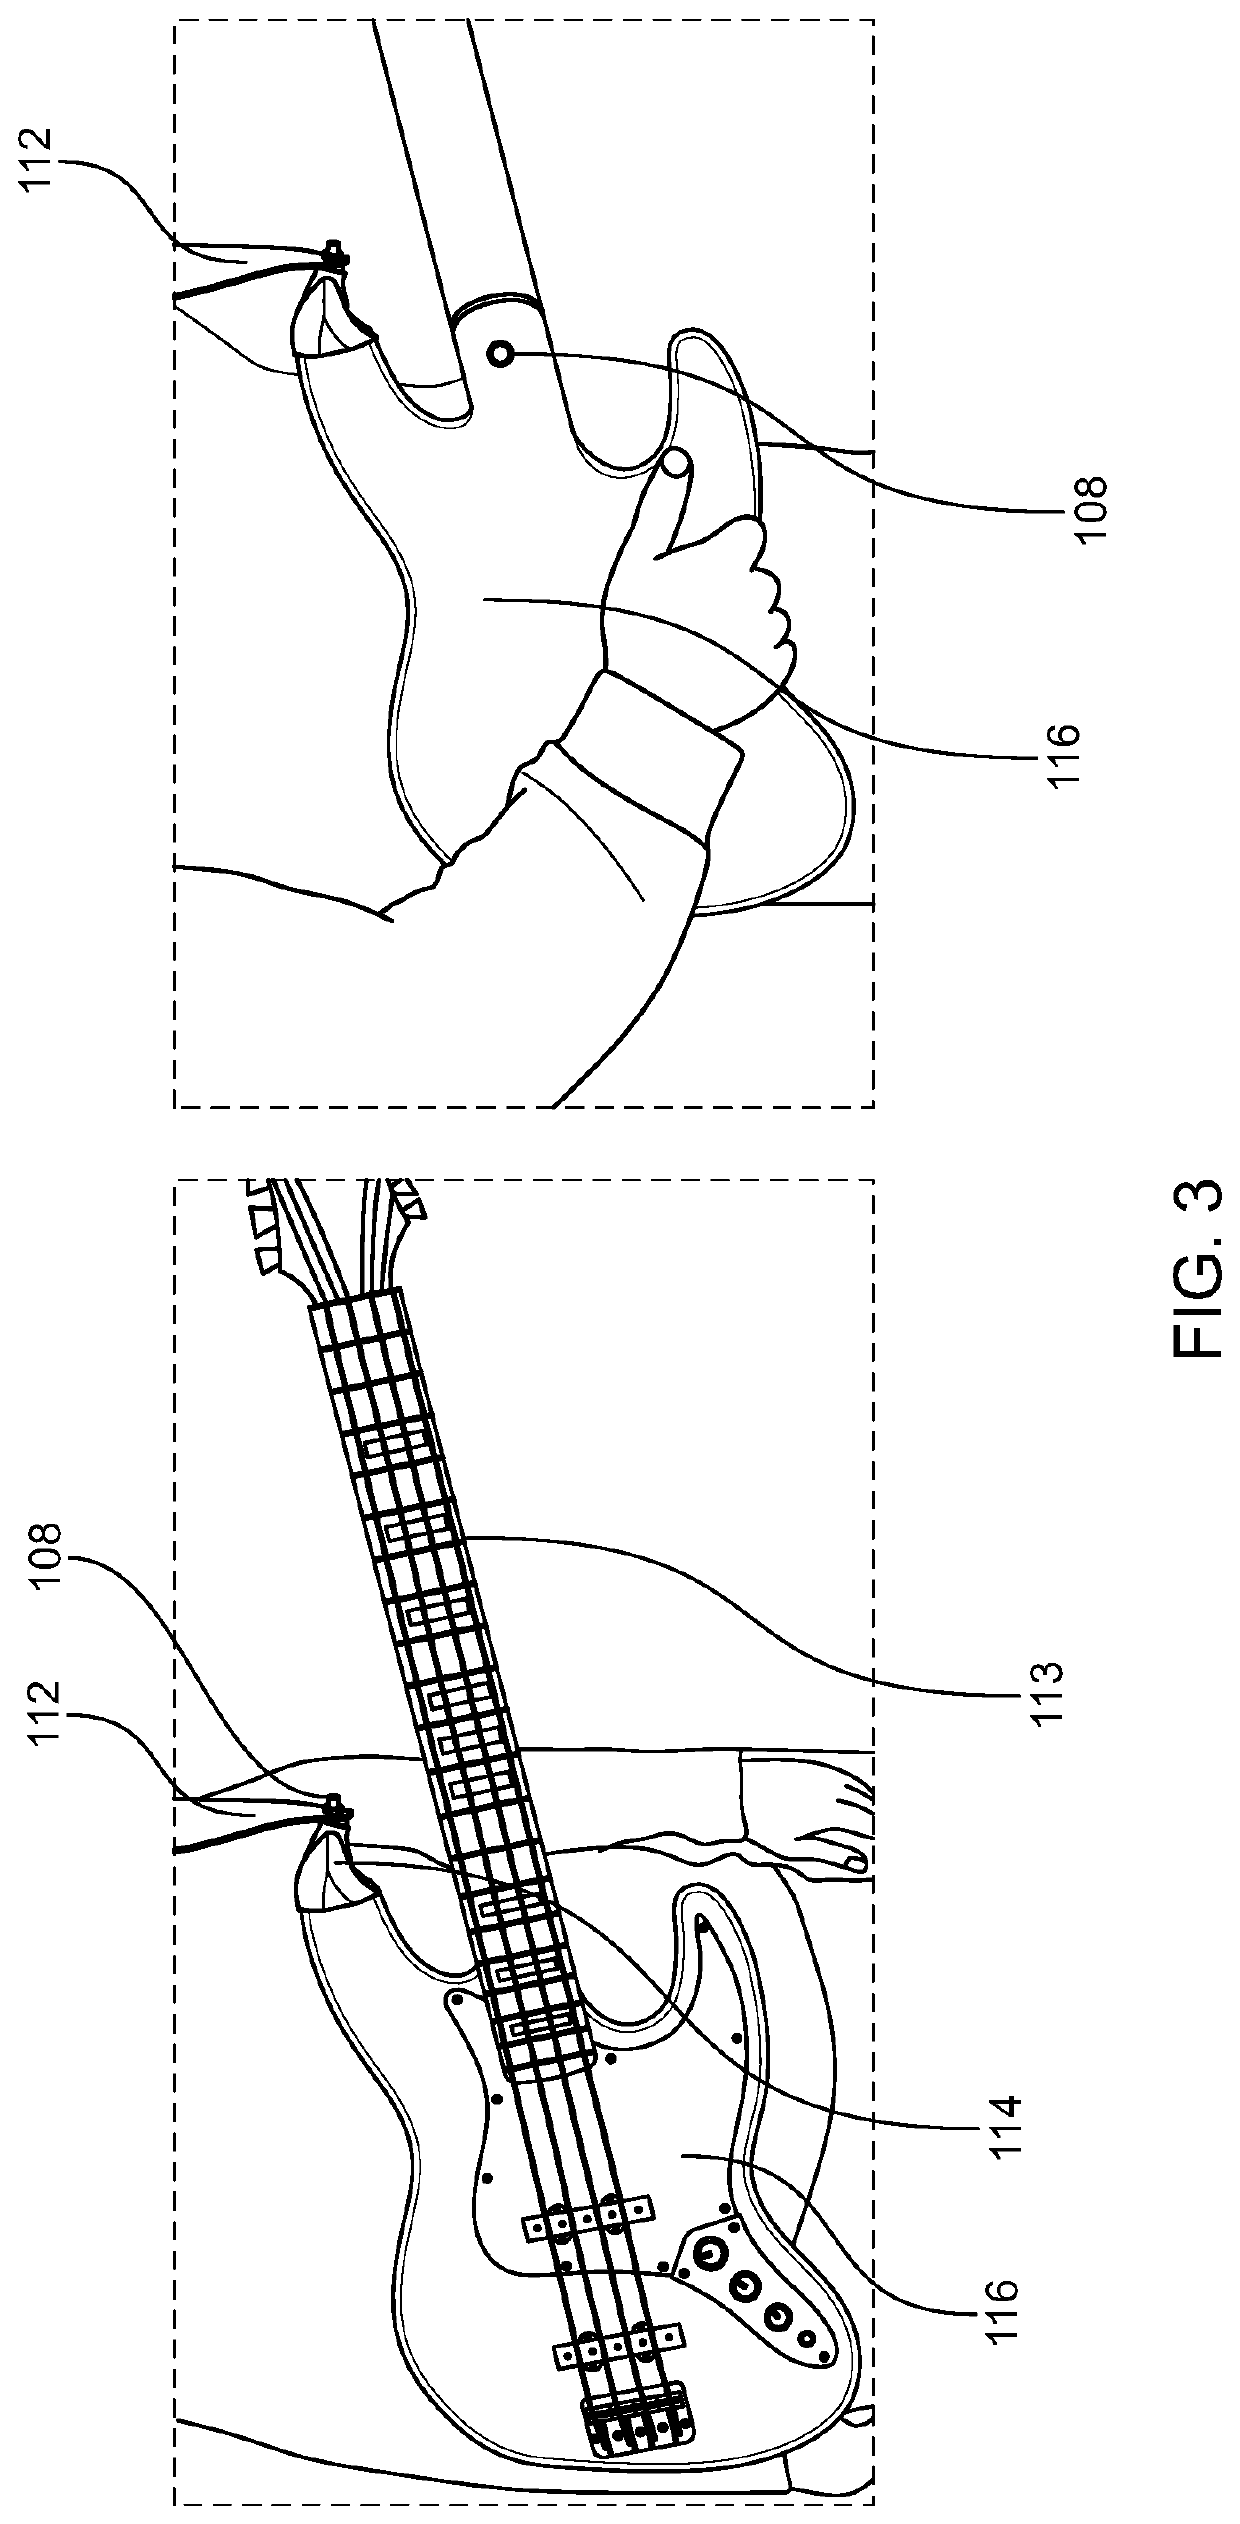 Apparatus for attaching a strap to a guitar or bass guitar